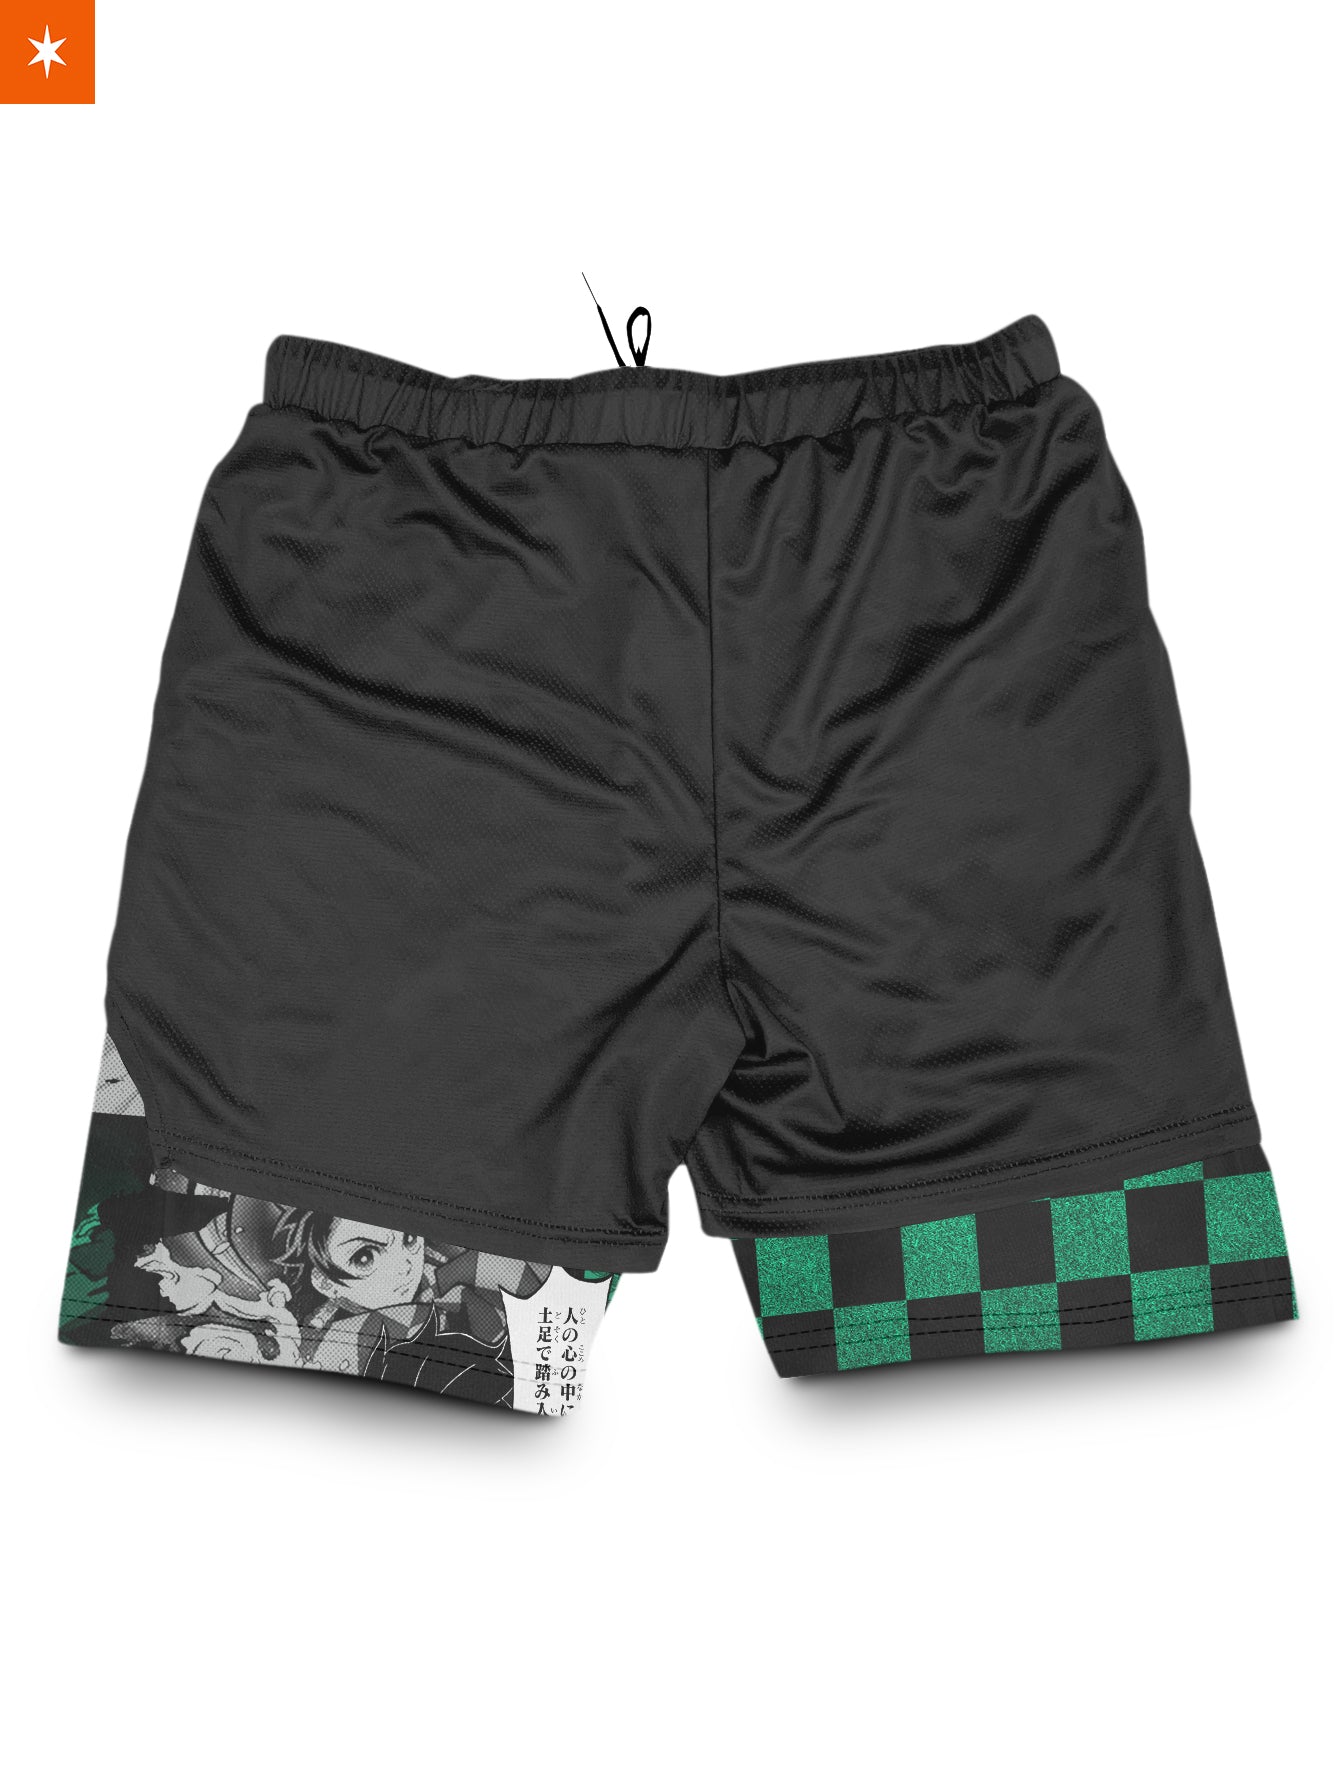 Devoted Protector Performance Shorts